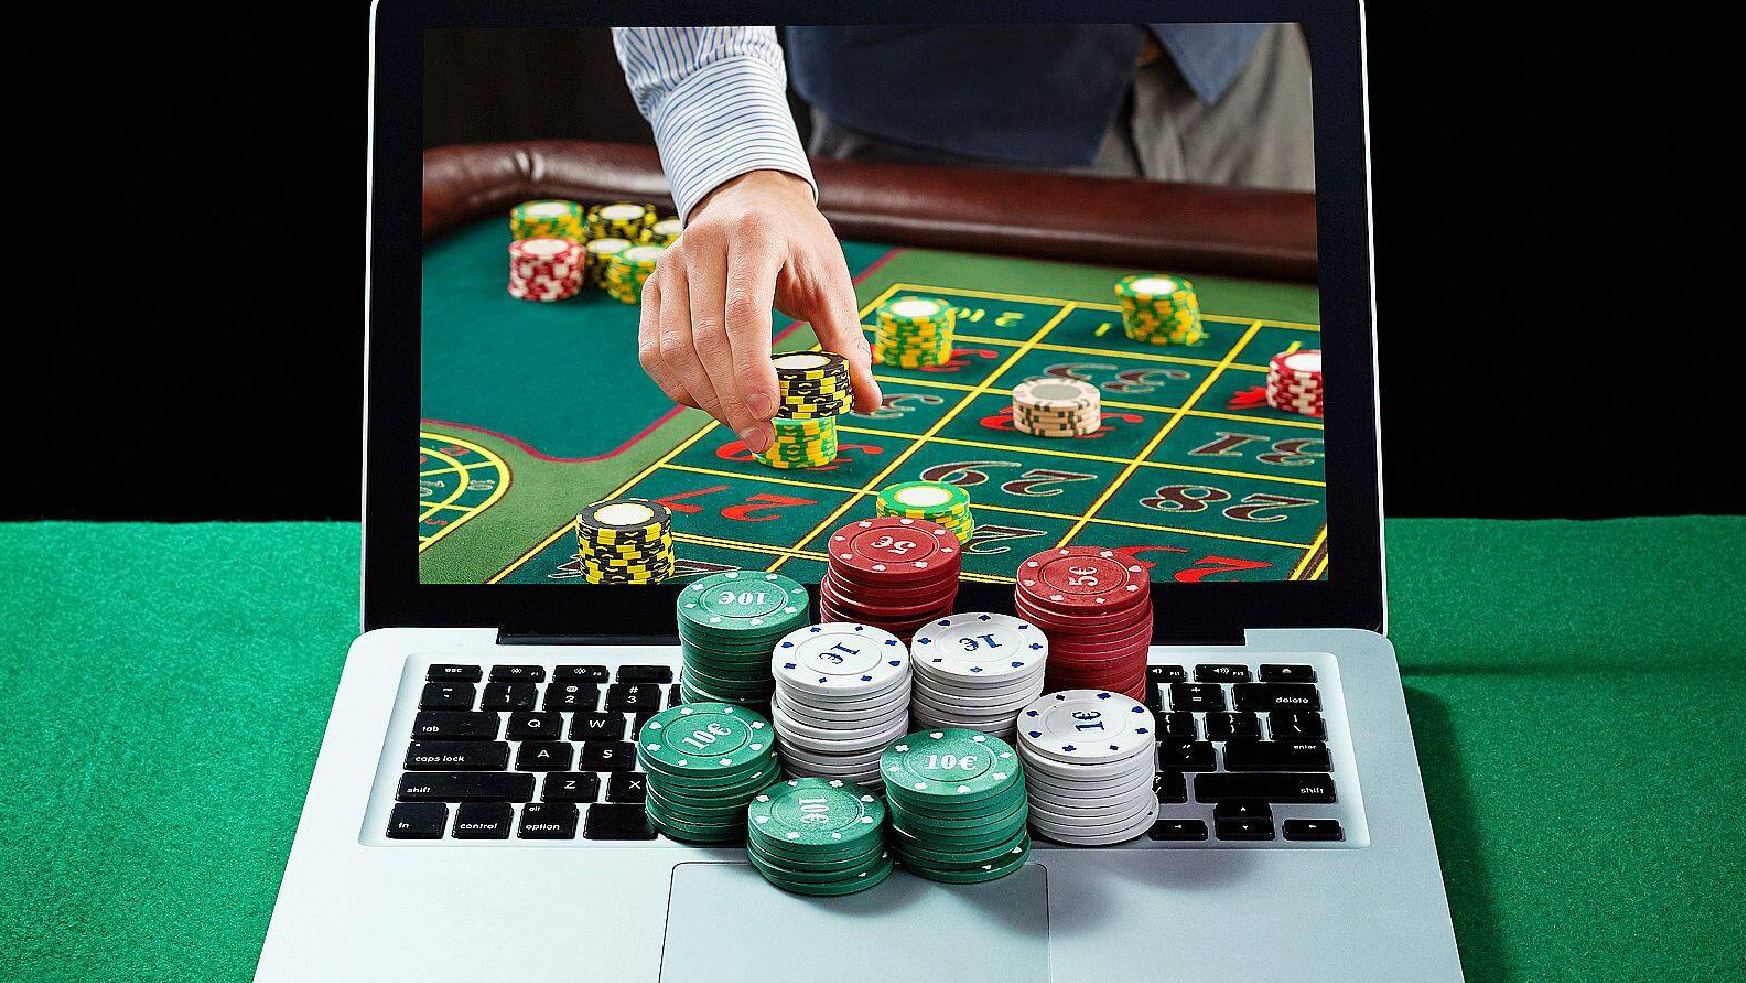 What Online Casino Has The Fastest Payouts